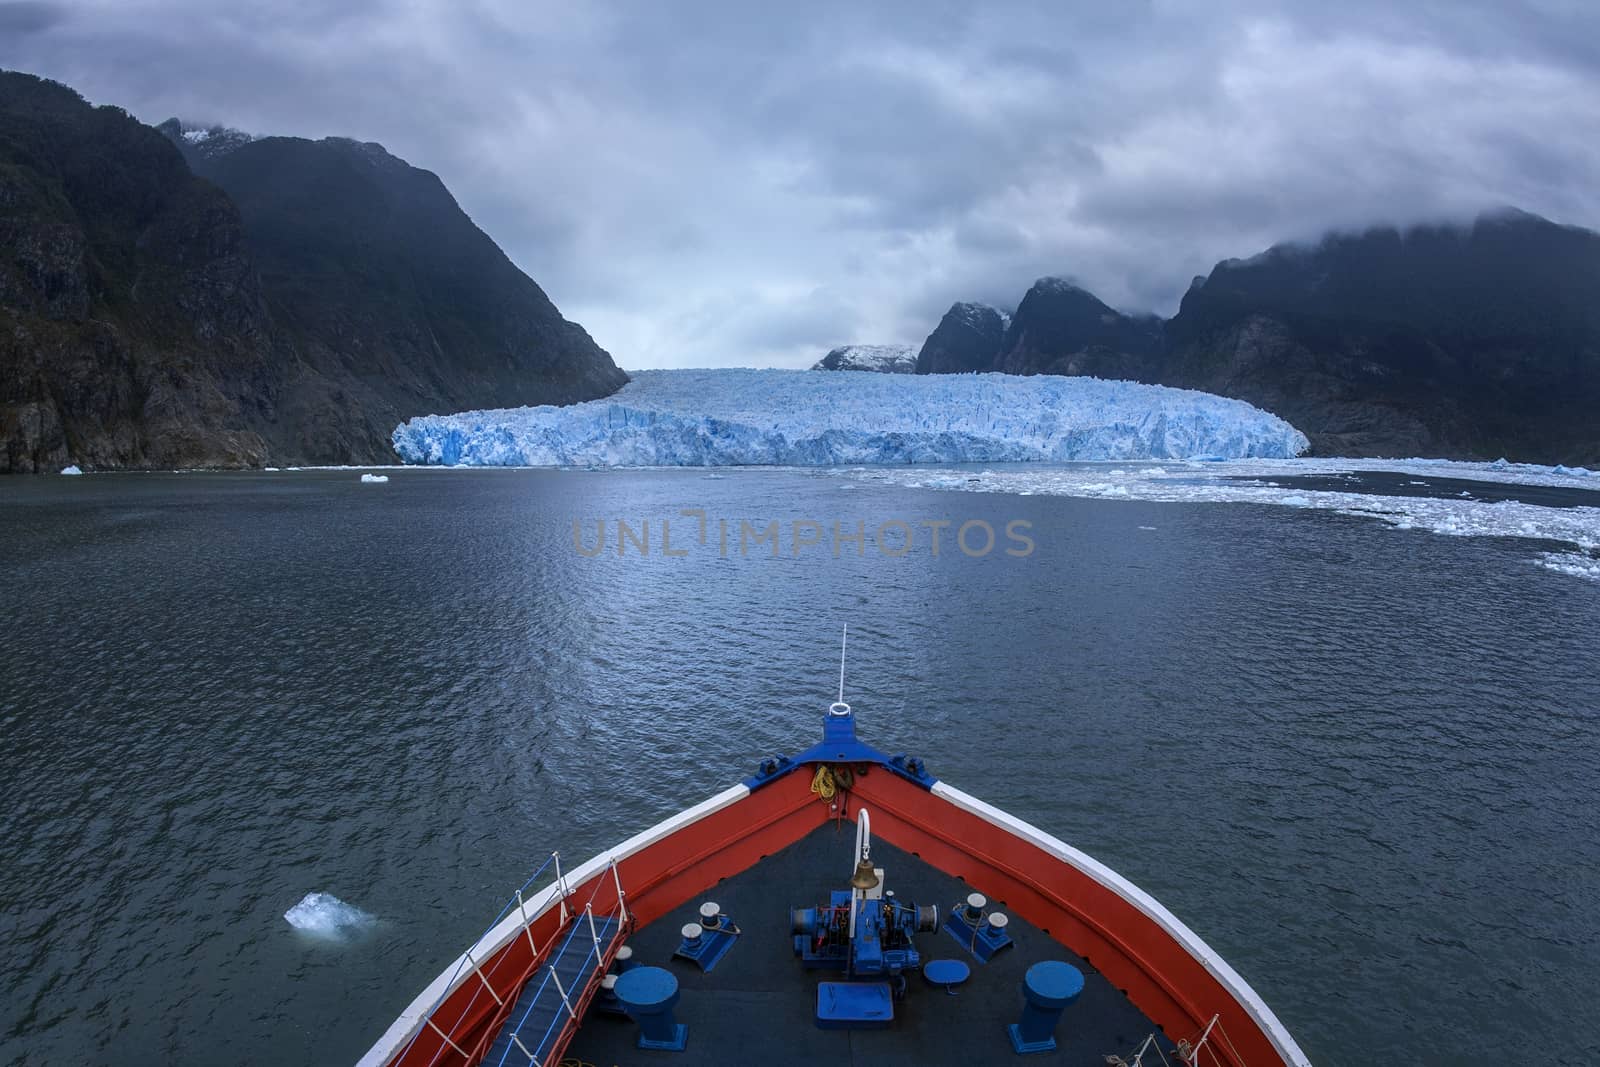 The San Rafael Glacier in the Northern Patagonian Ice Field in southern Chile, South America.